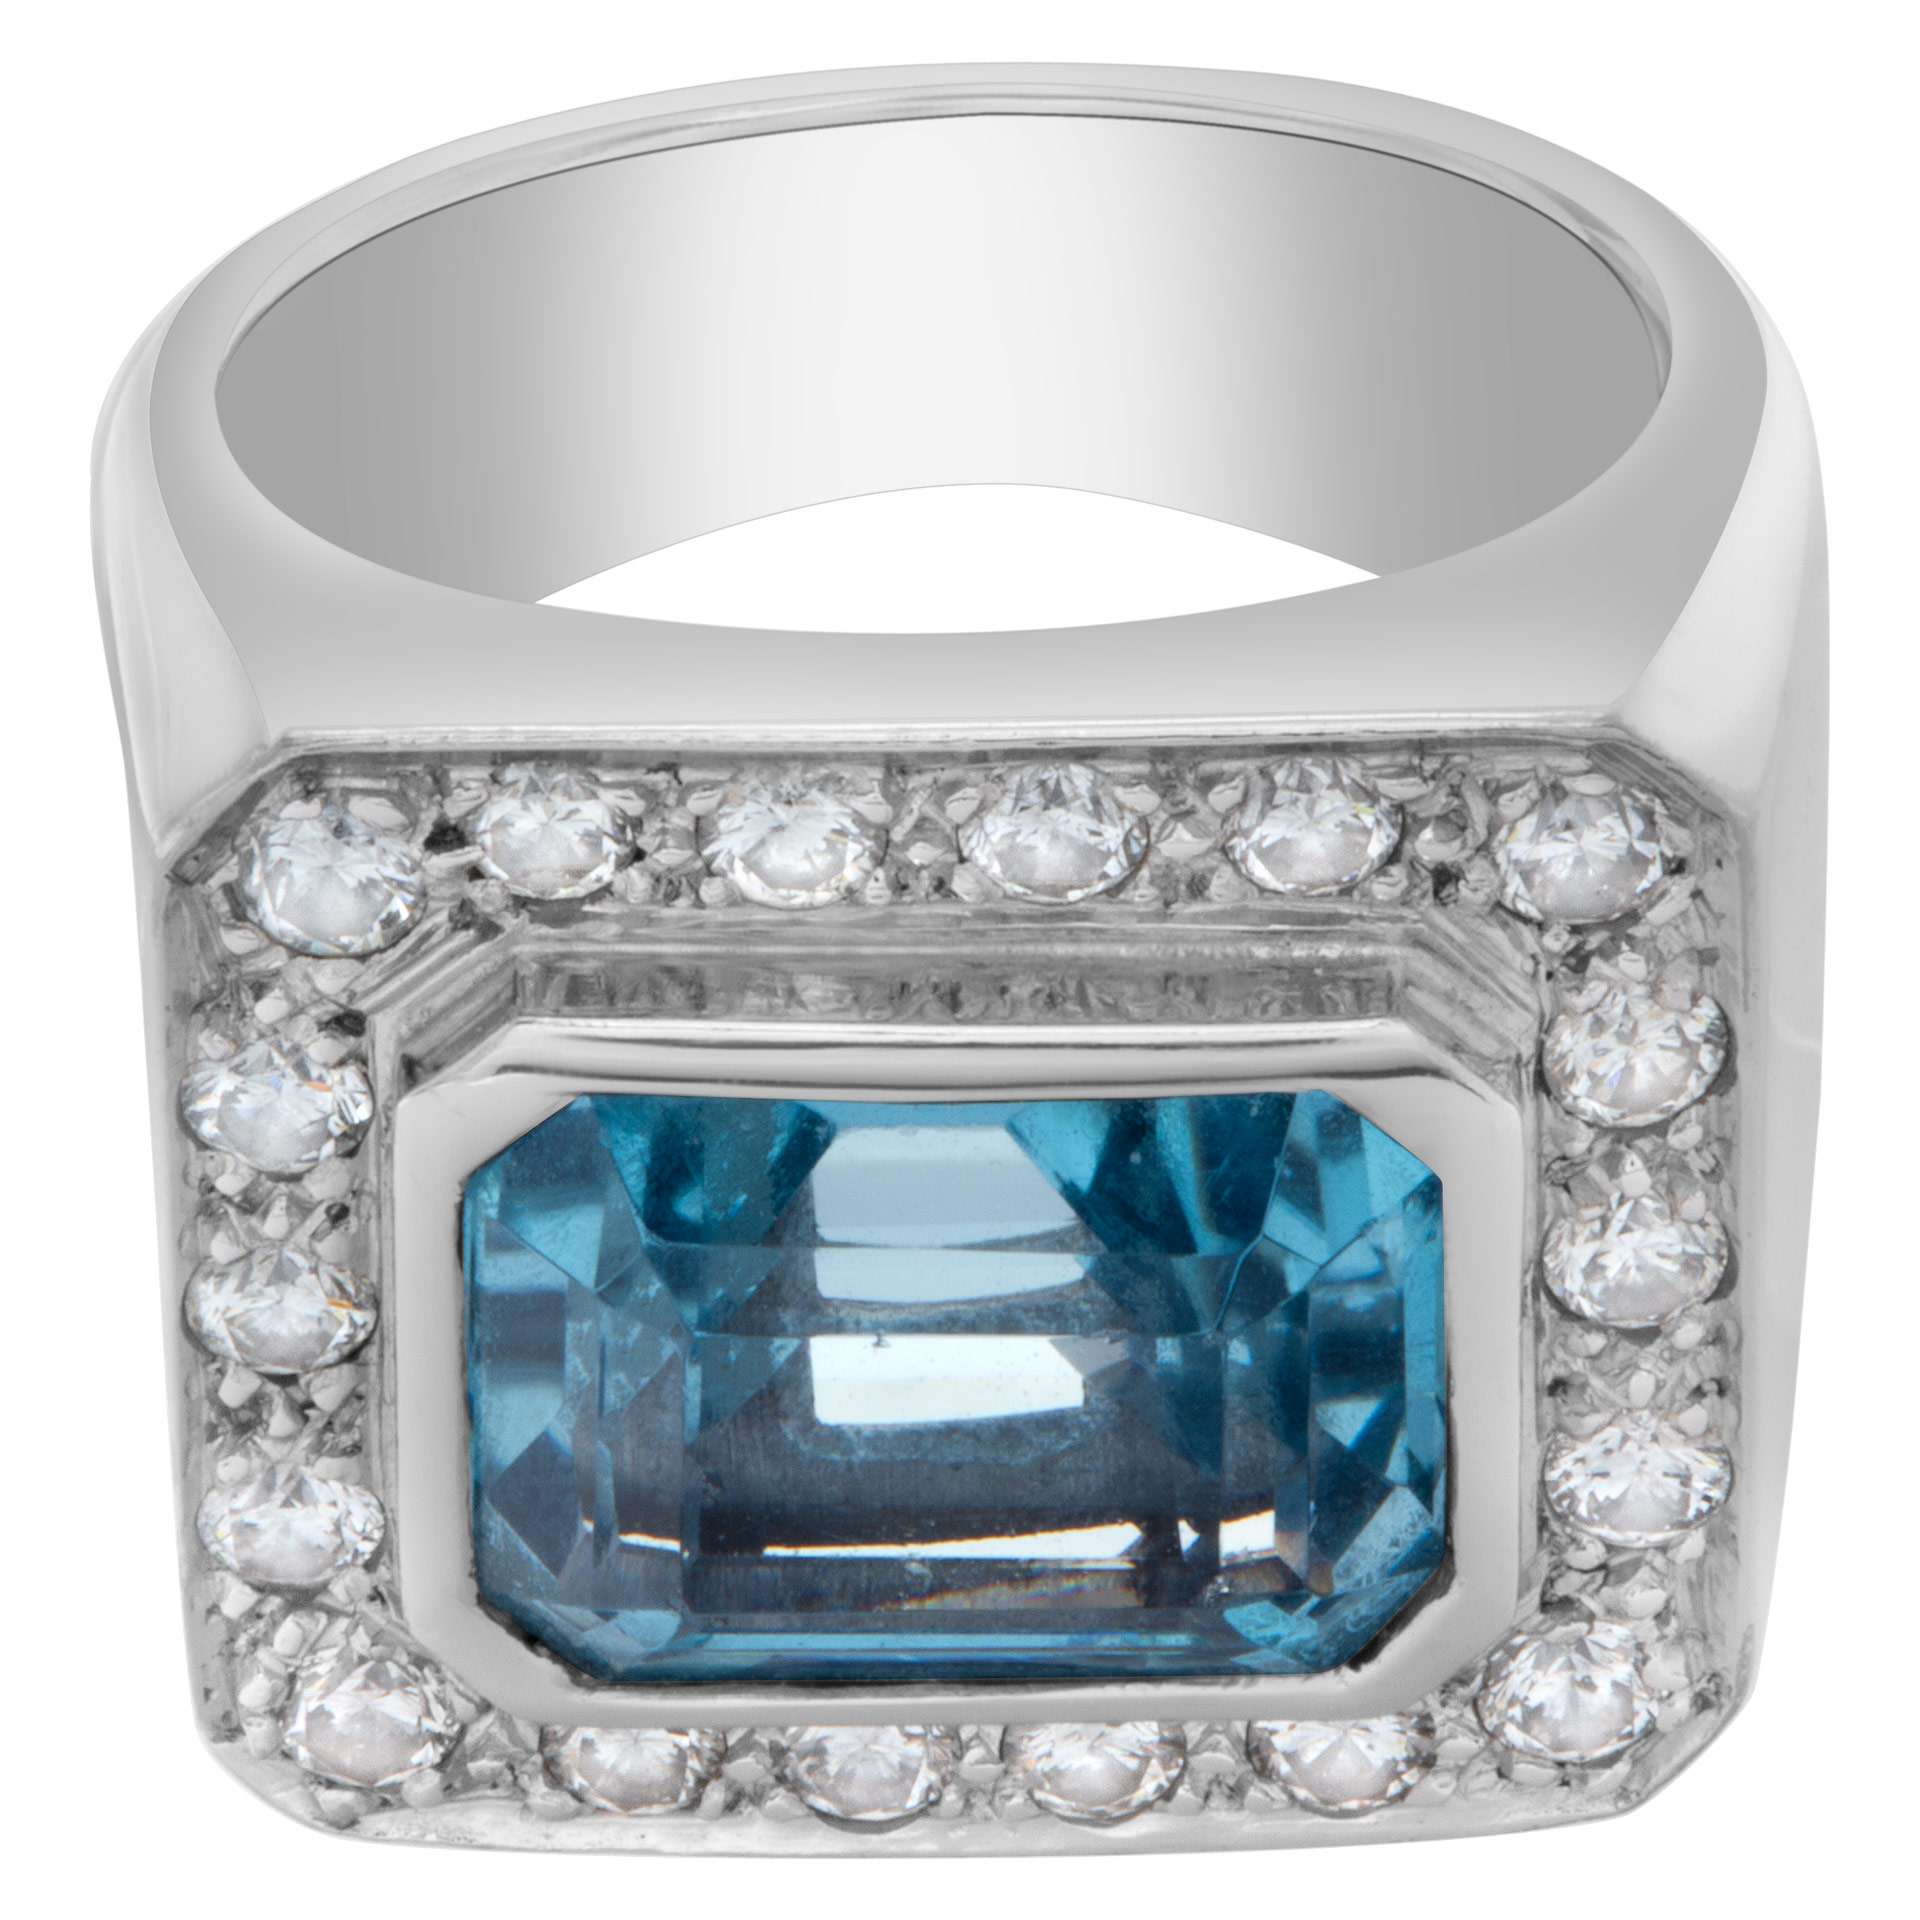 Blue topaz ring in 18k white gold with diamonds image 1